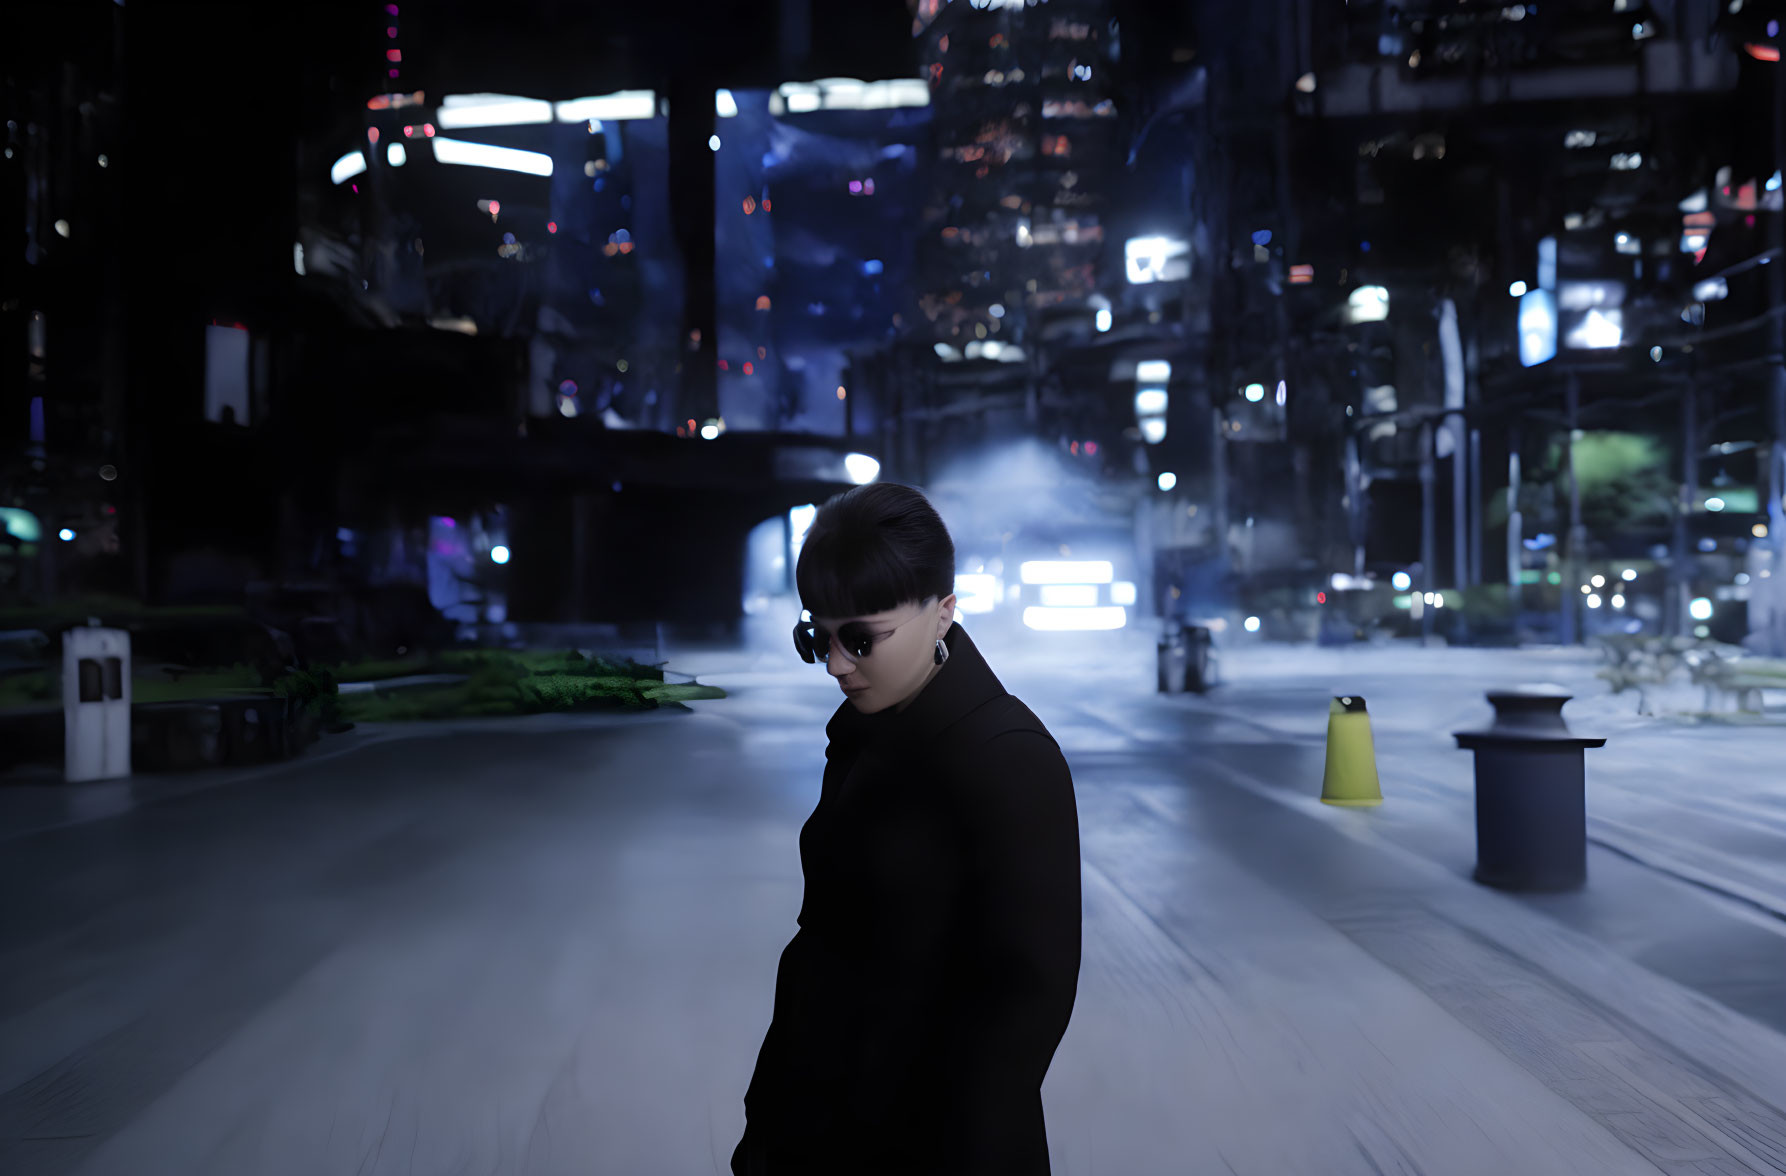 Person in sunglasses on urban street at night with futuristic city lights